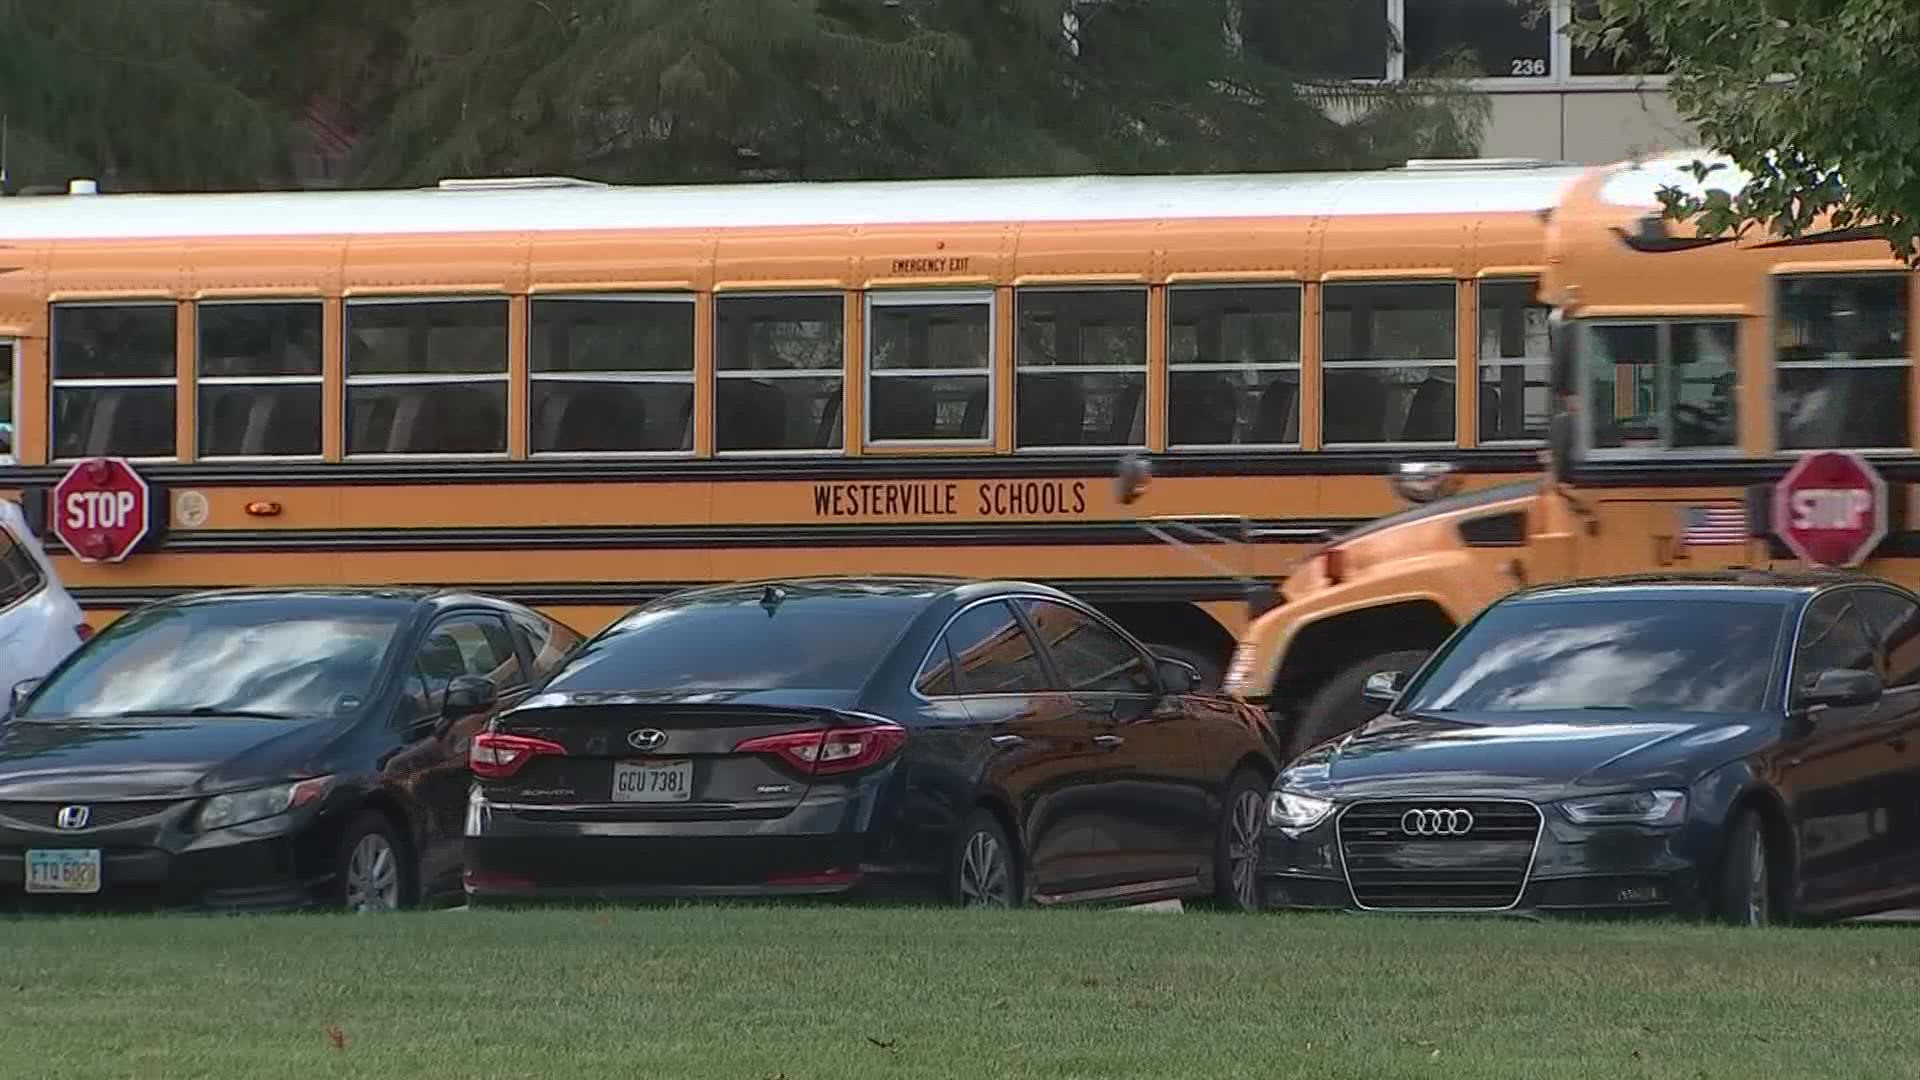 School districts across central Ohio have reported bus driver shortages in recent months.